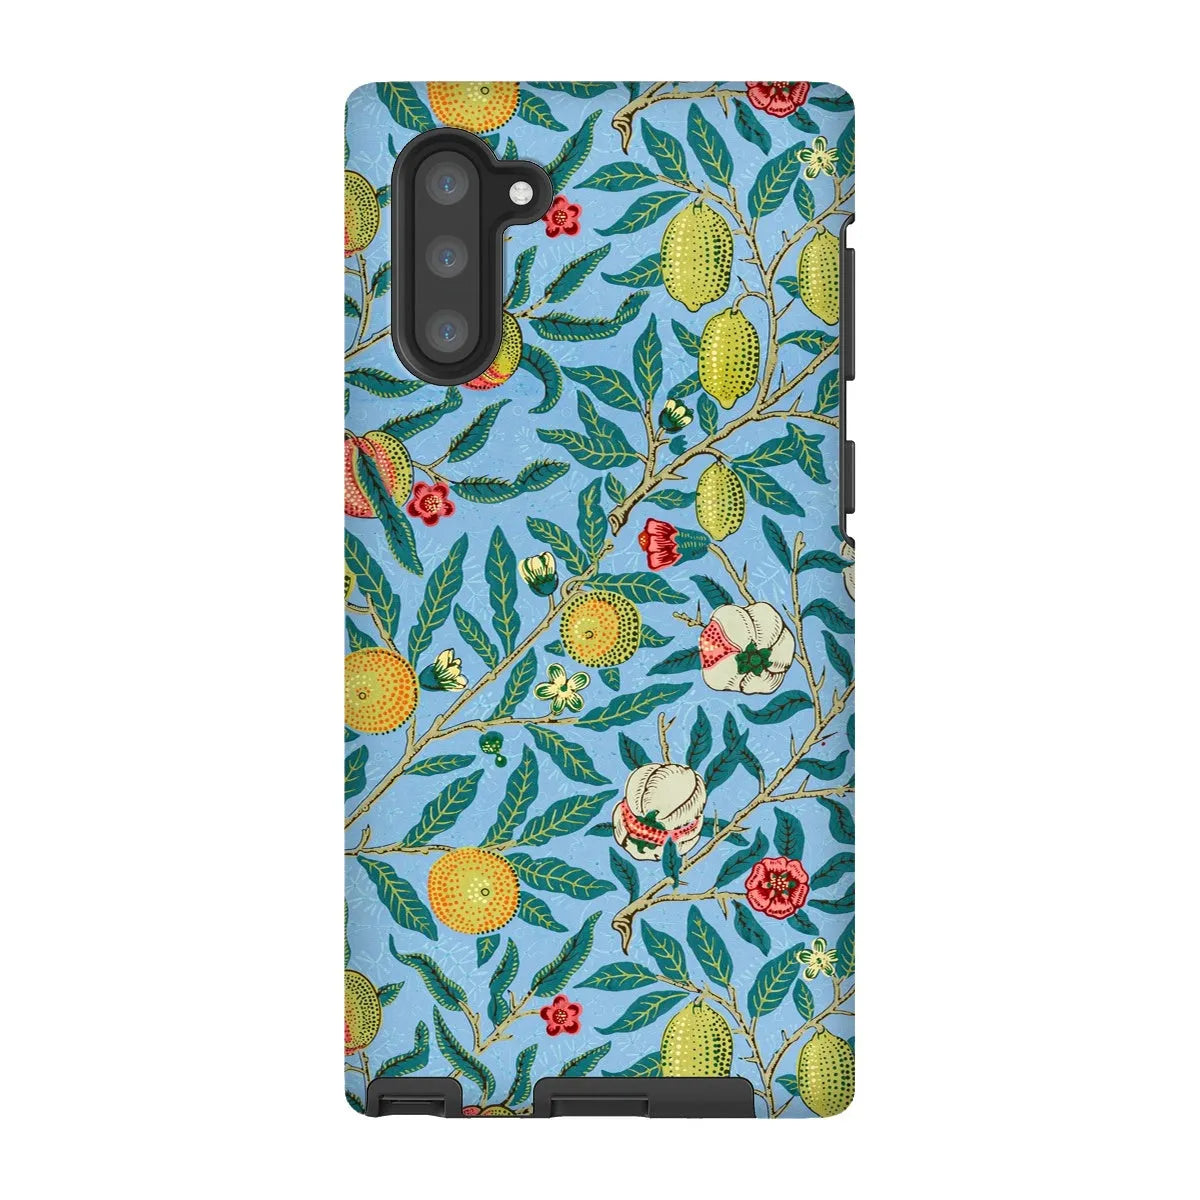 Four Fruits Aesthetic Art Phone Case - William Morris - Samsung Galaxy Note 10 / Matte - Mobile Phone Cases - Aesthetic